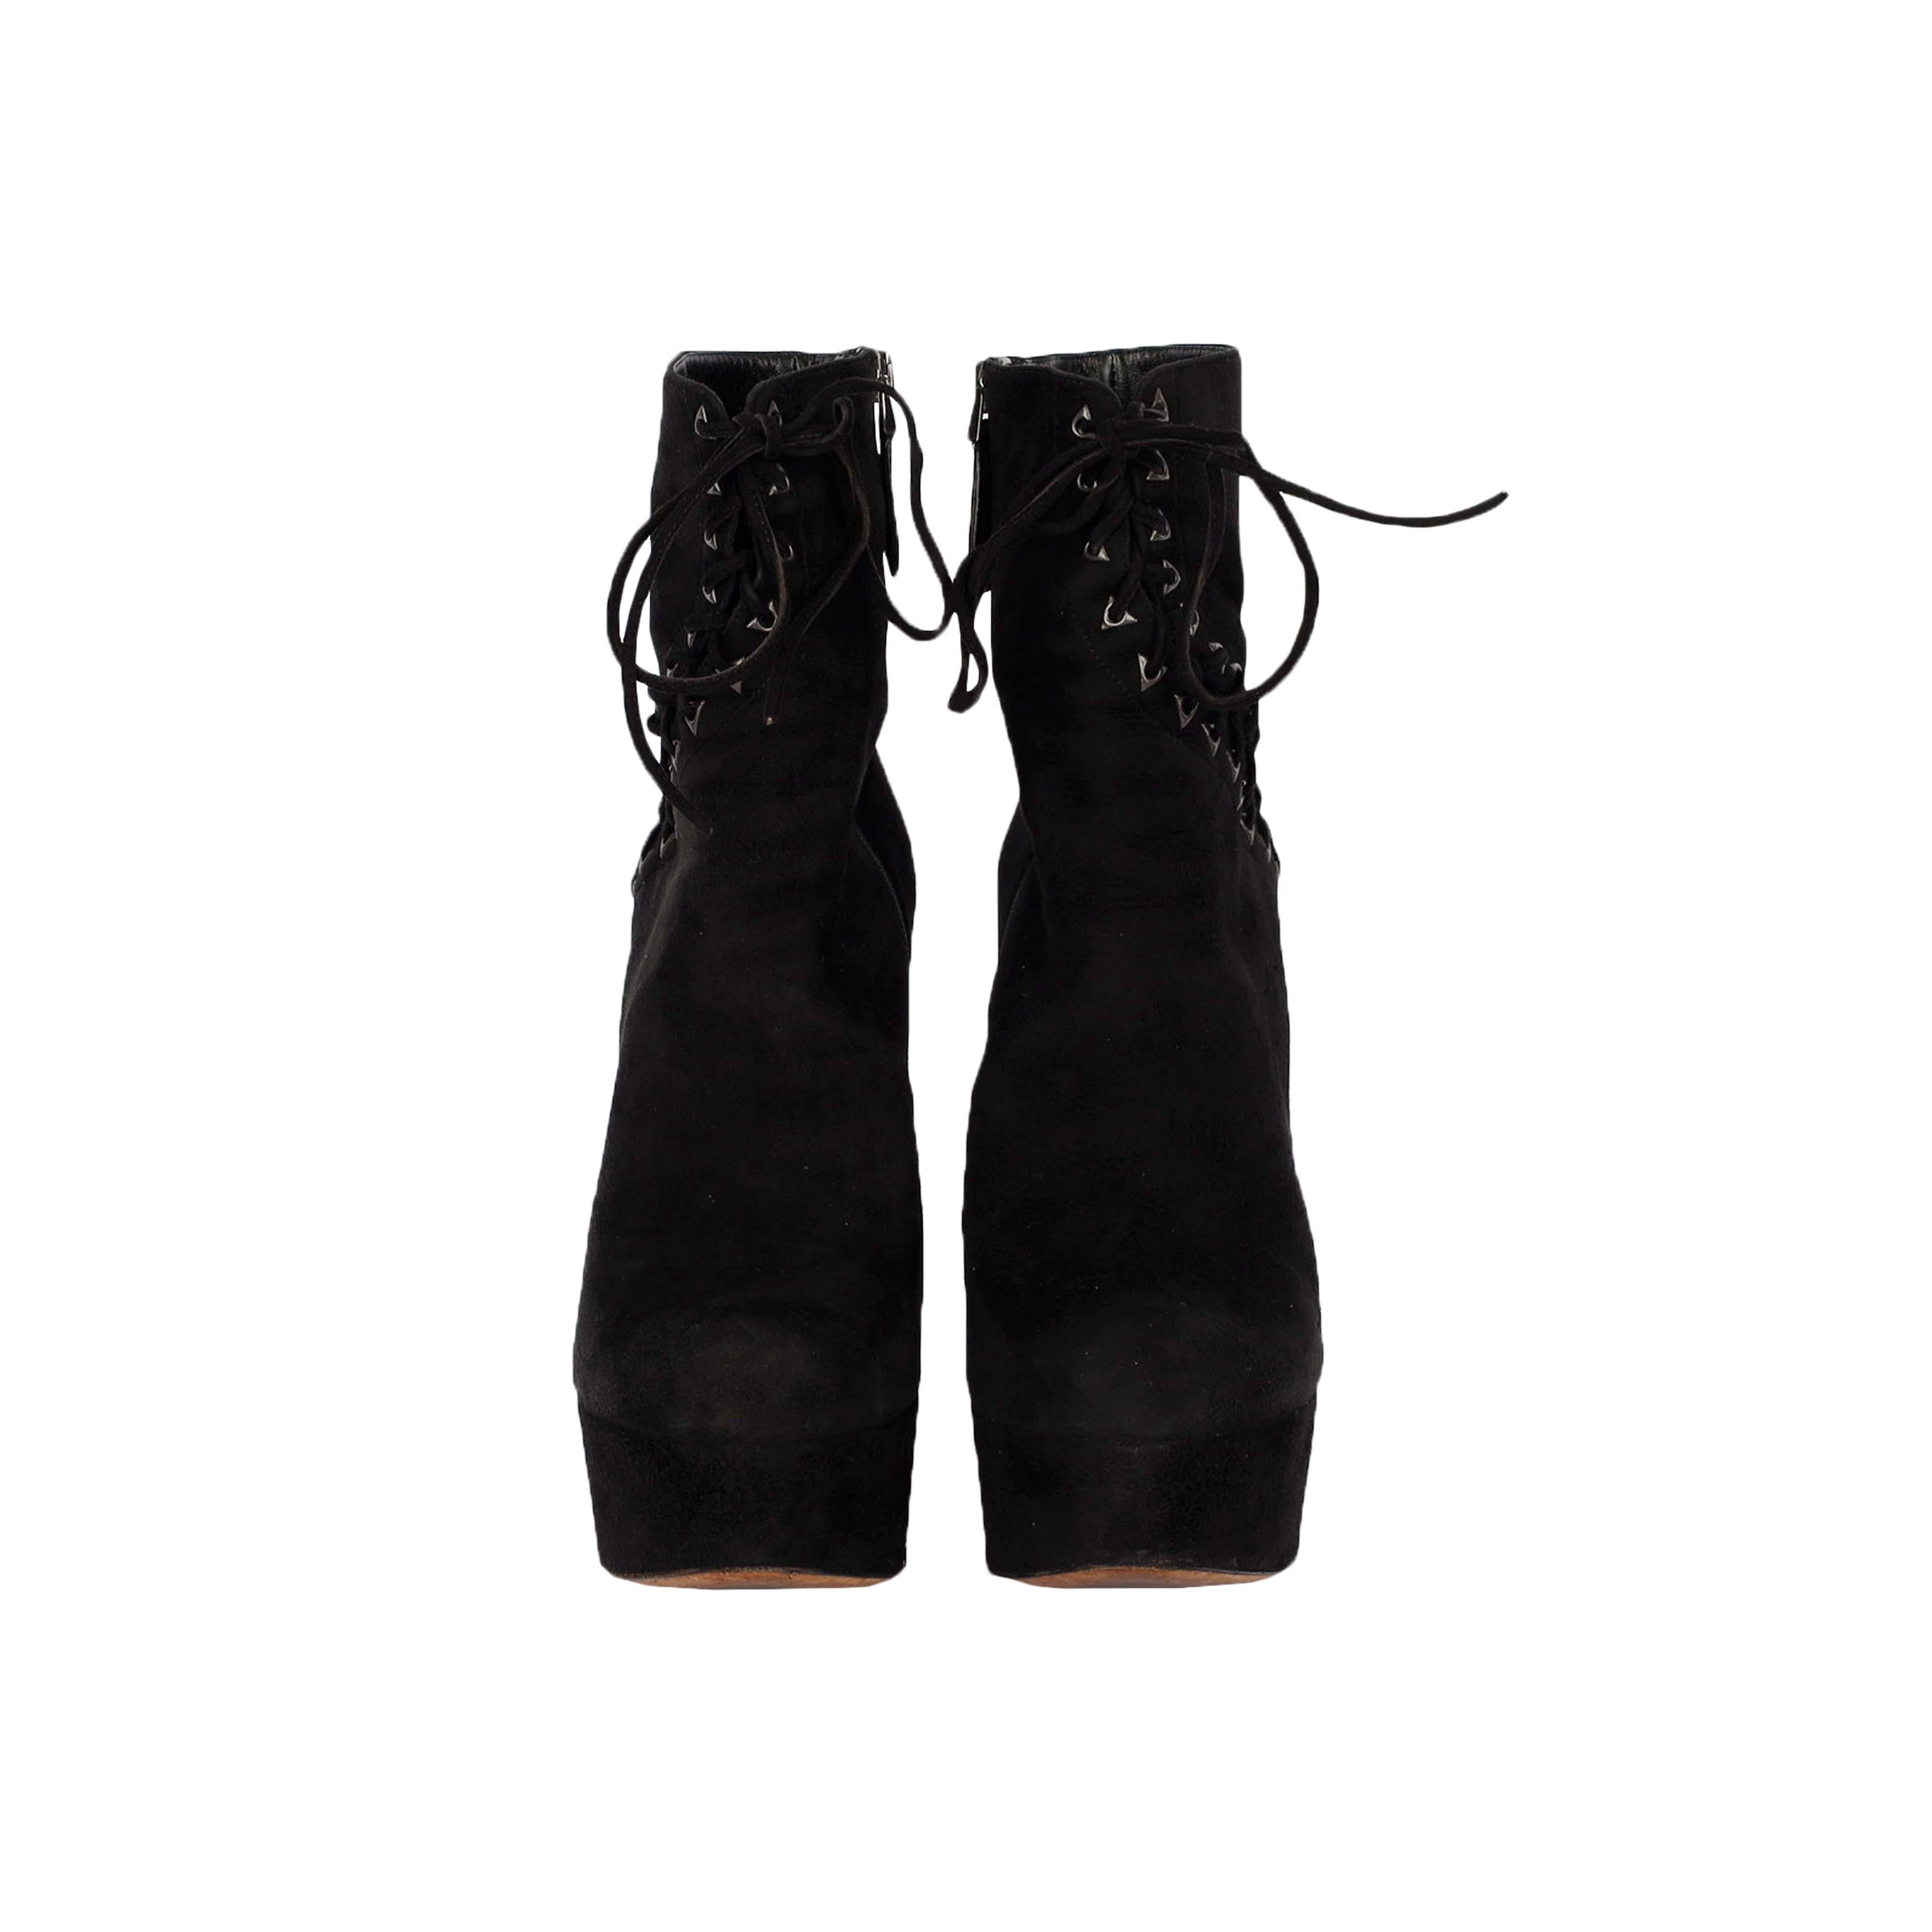 Exquisitely crafted in black suede, the Alaïa Lace-up Corset Booties are your winter essentials. With triangular eyelets enhancing the chicness of the booties, the gunmetal chain closing on the sides makes them easy to slip into. 

Heel Length - 14